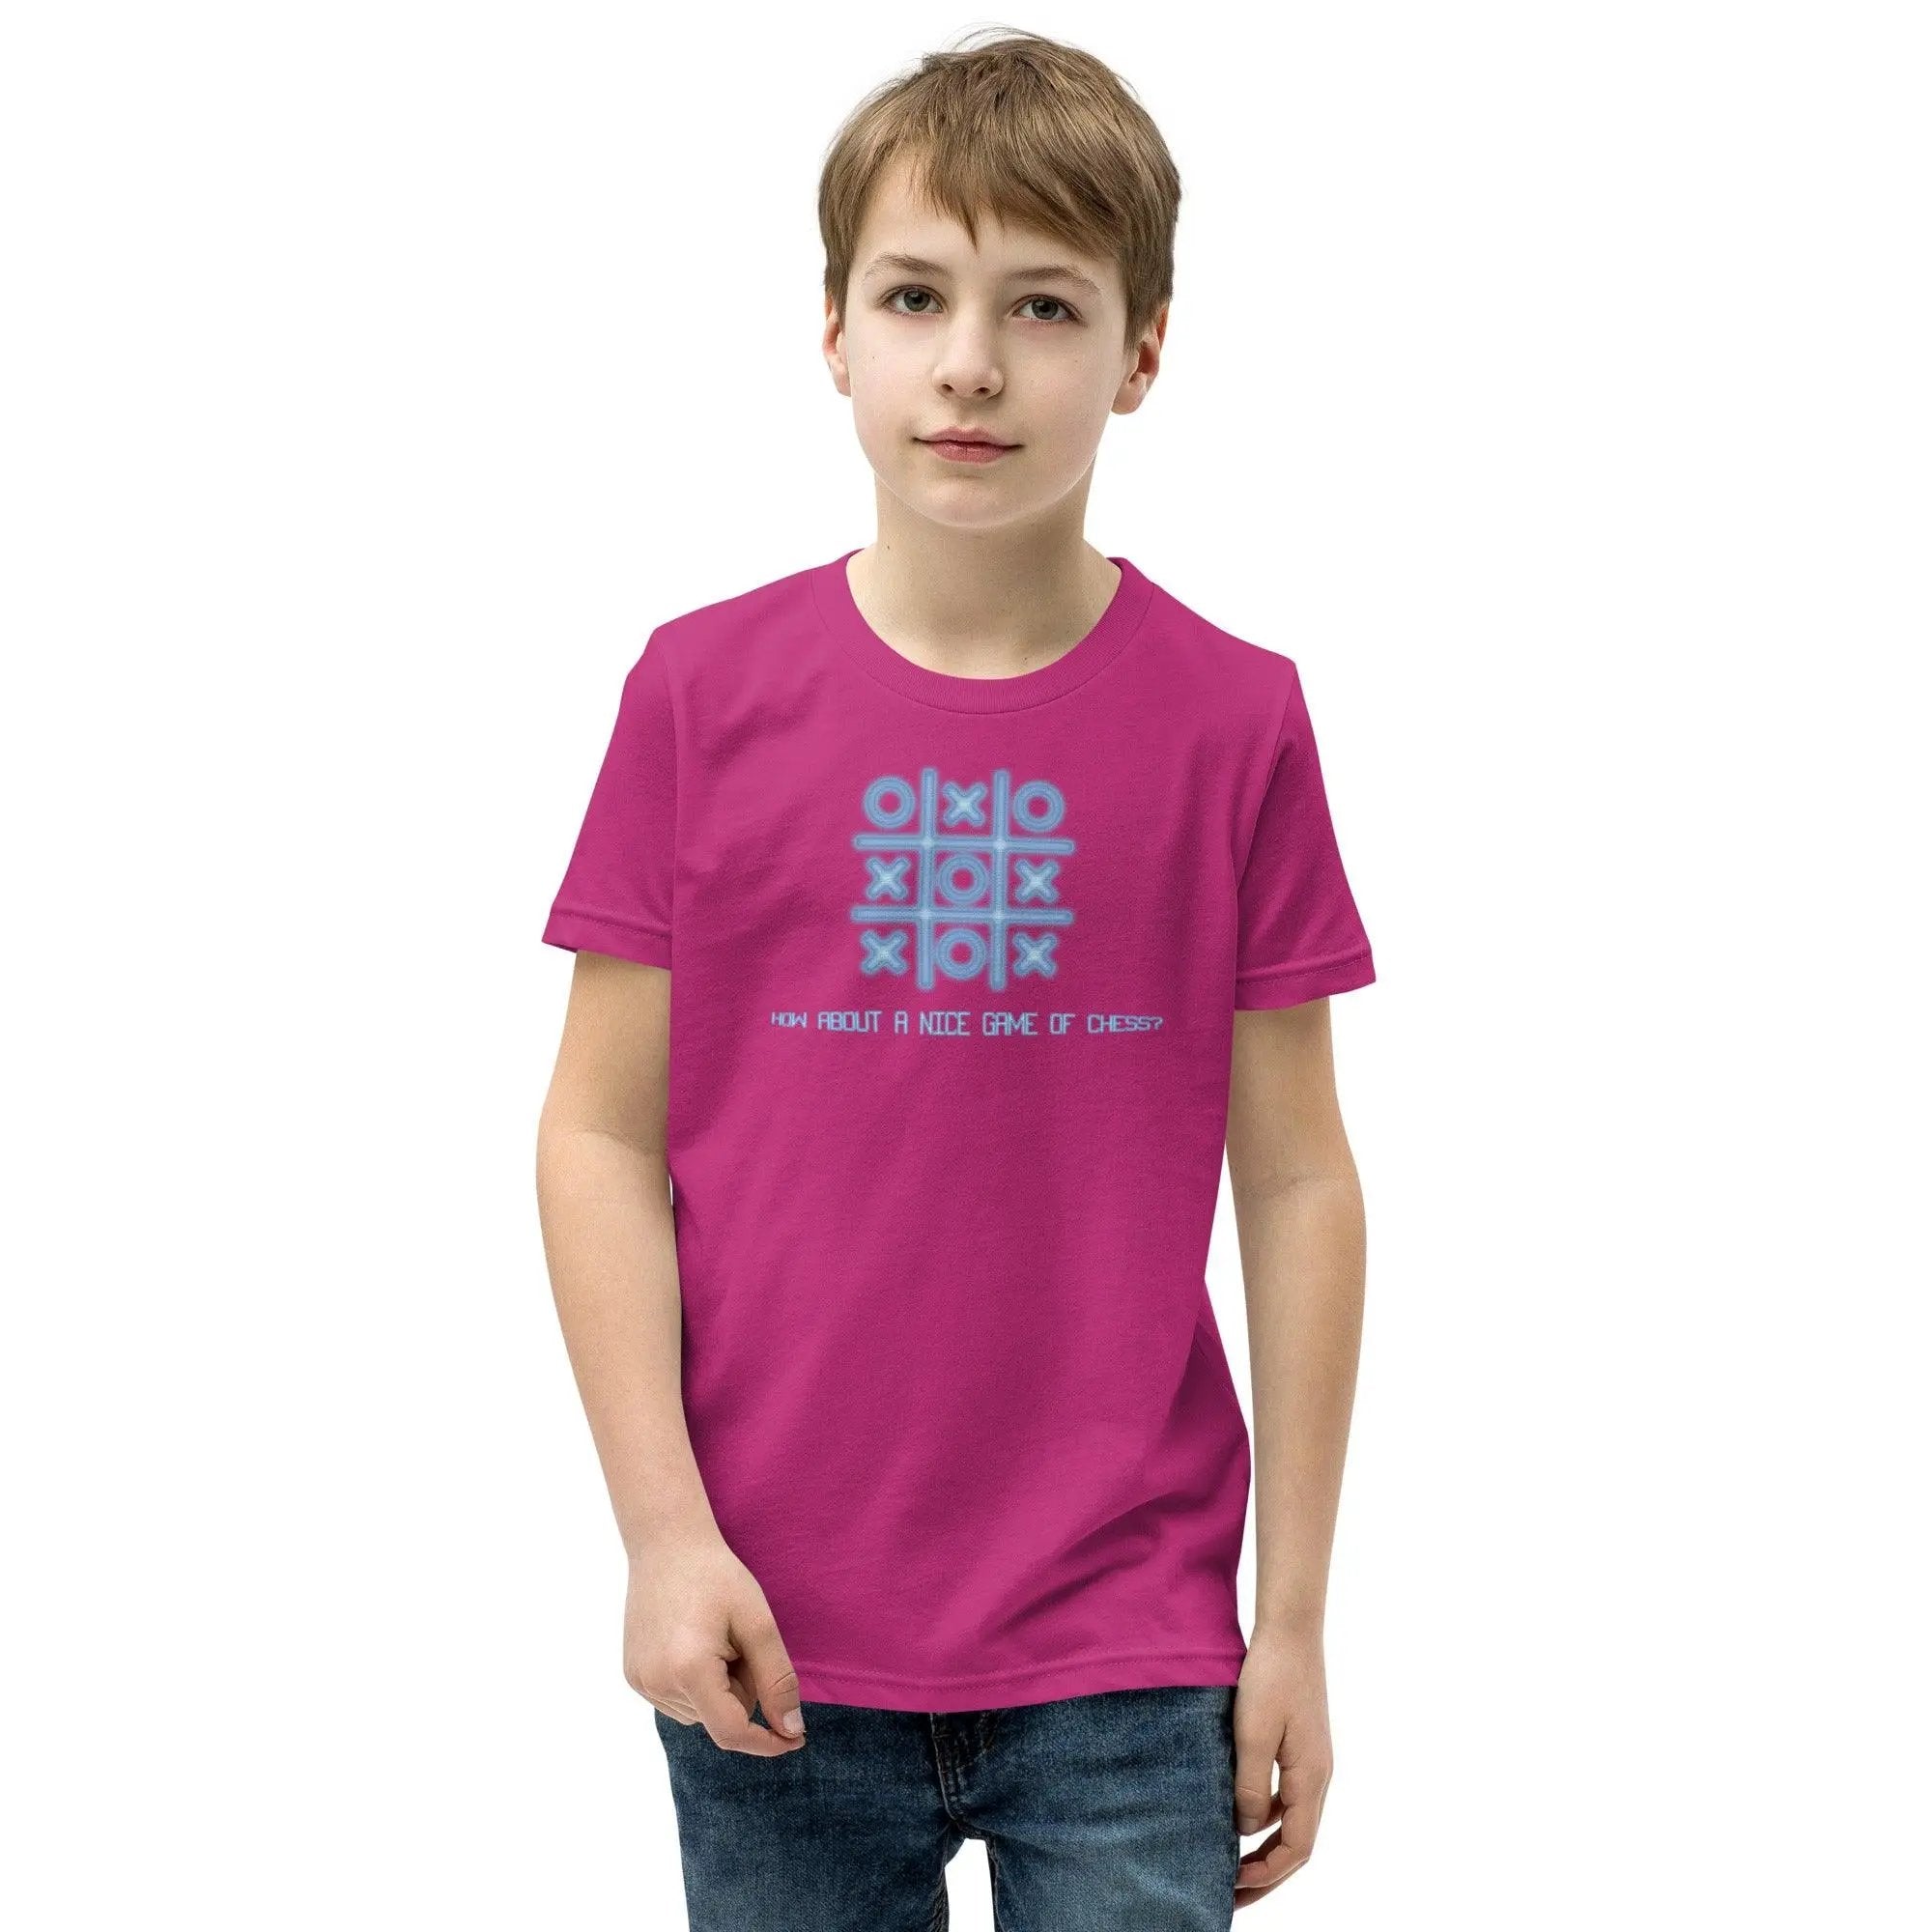 How About a Nice Game Of Chess? Youth T-Shirt